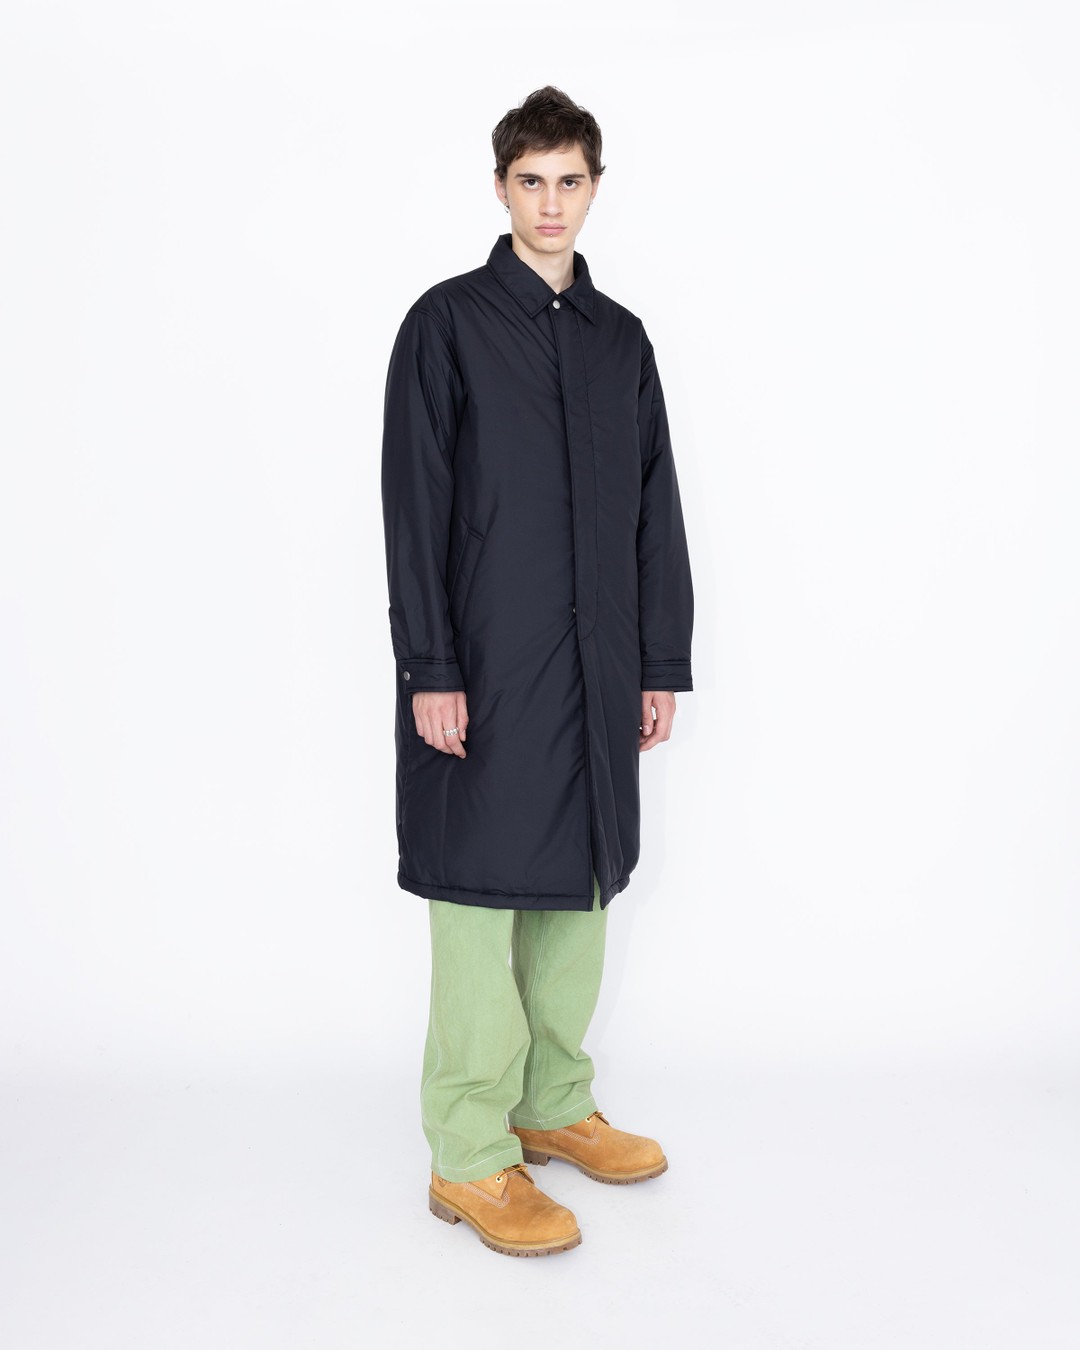 Highsnobiety HS05 – Light Insulated Eco-Poly Trench Coat Black - Outerwear - Black - Image 4